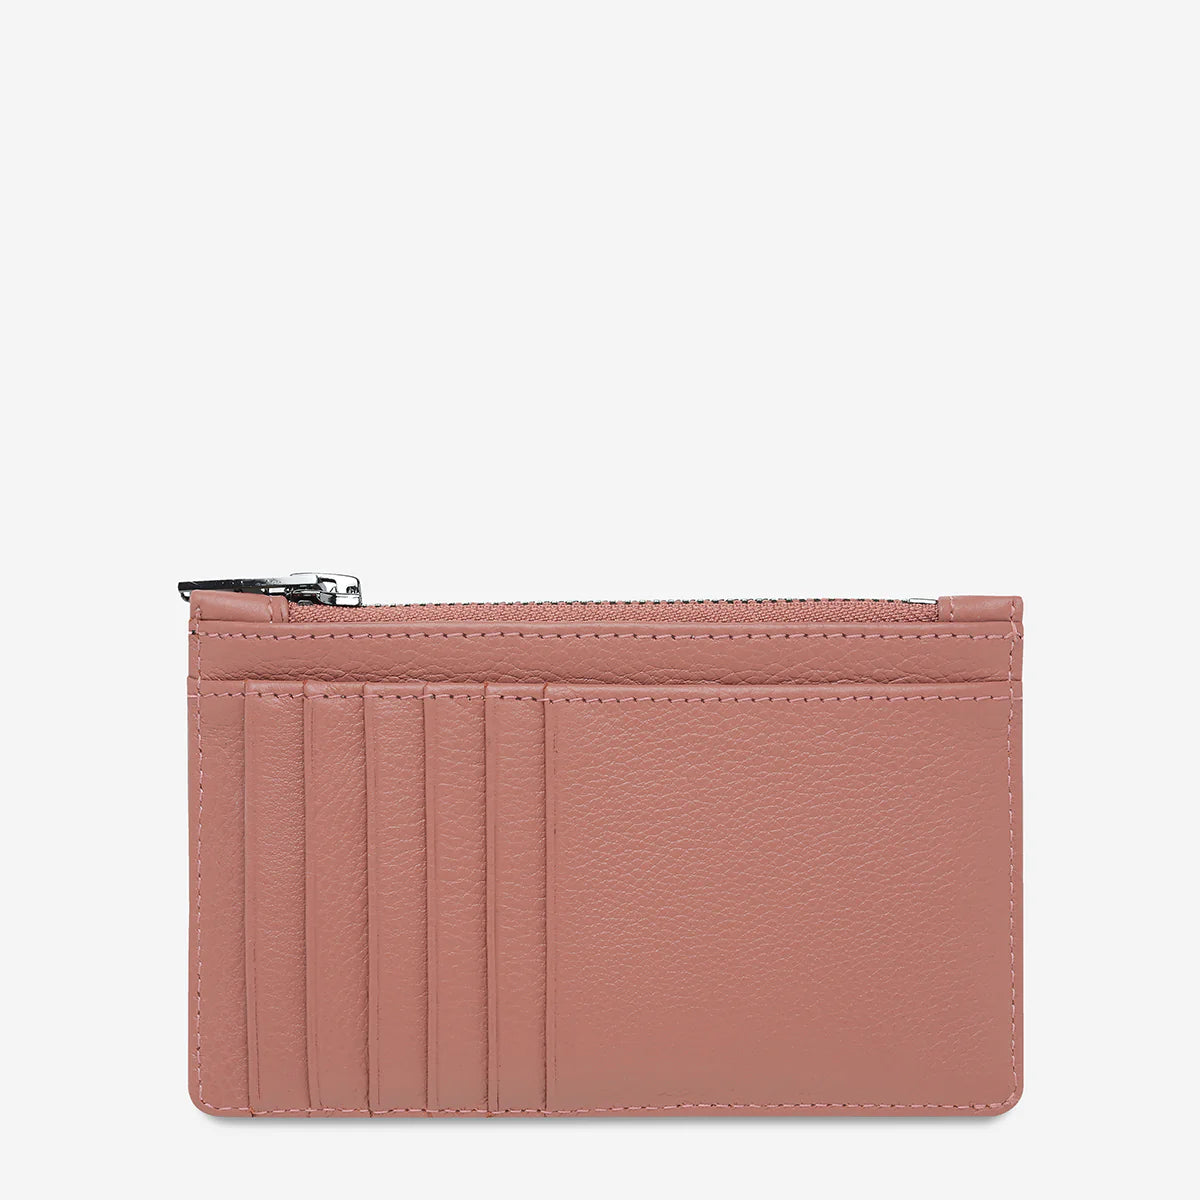 Status Anxiety Avoiding Things Purse- Dusty Pink